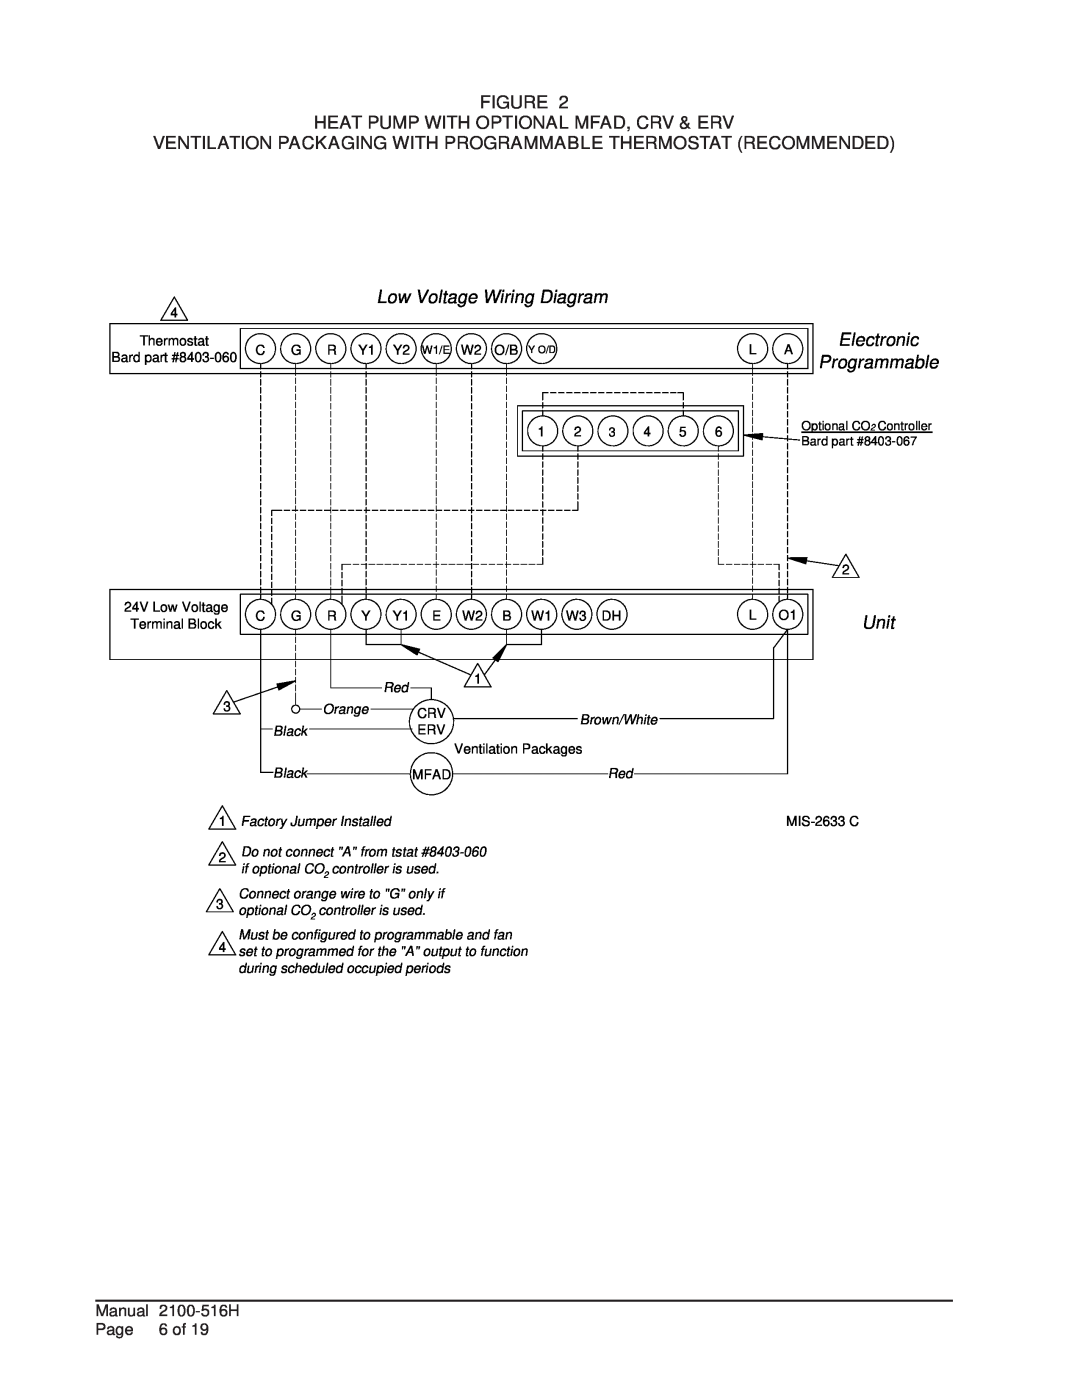 Bard W**H*D, S**H*D, T**H*D installation instructions Low Voltage Wiring Diagram, Unit, Electronic, Programmable 